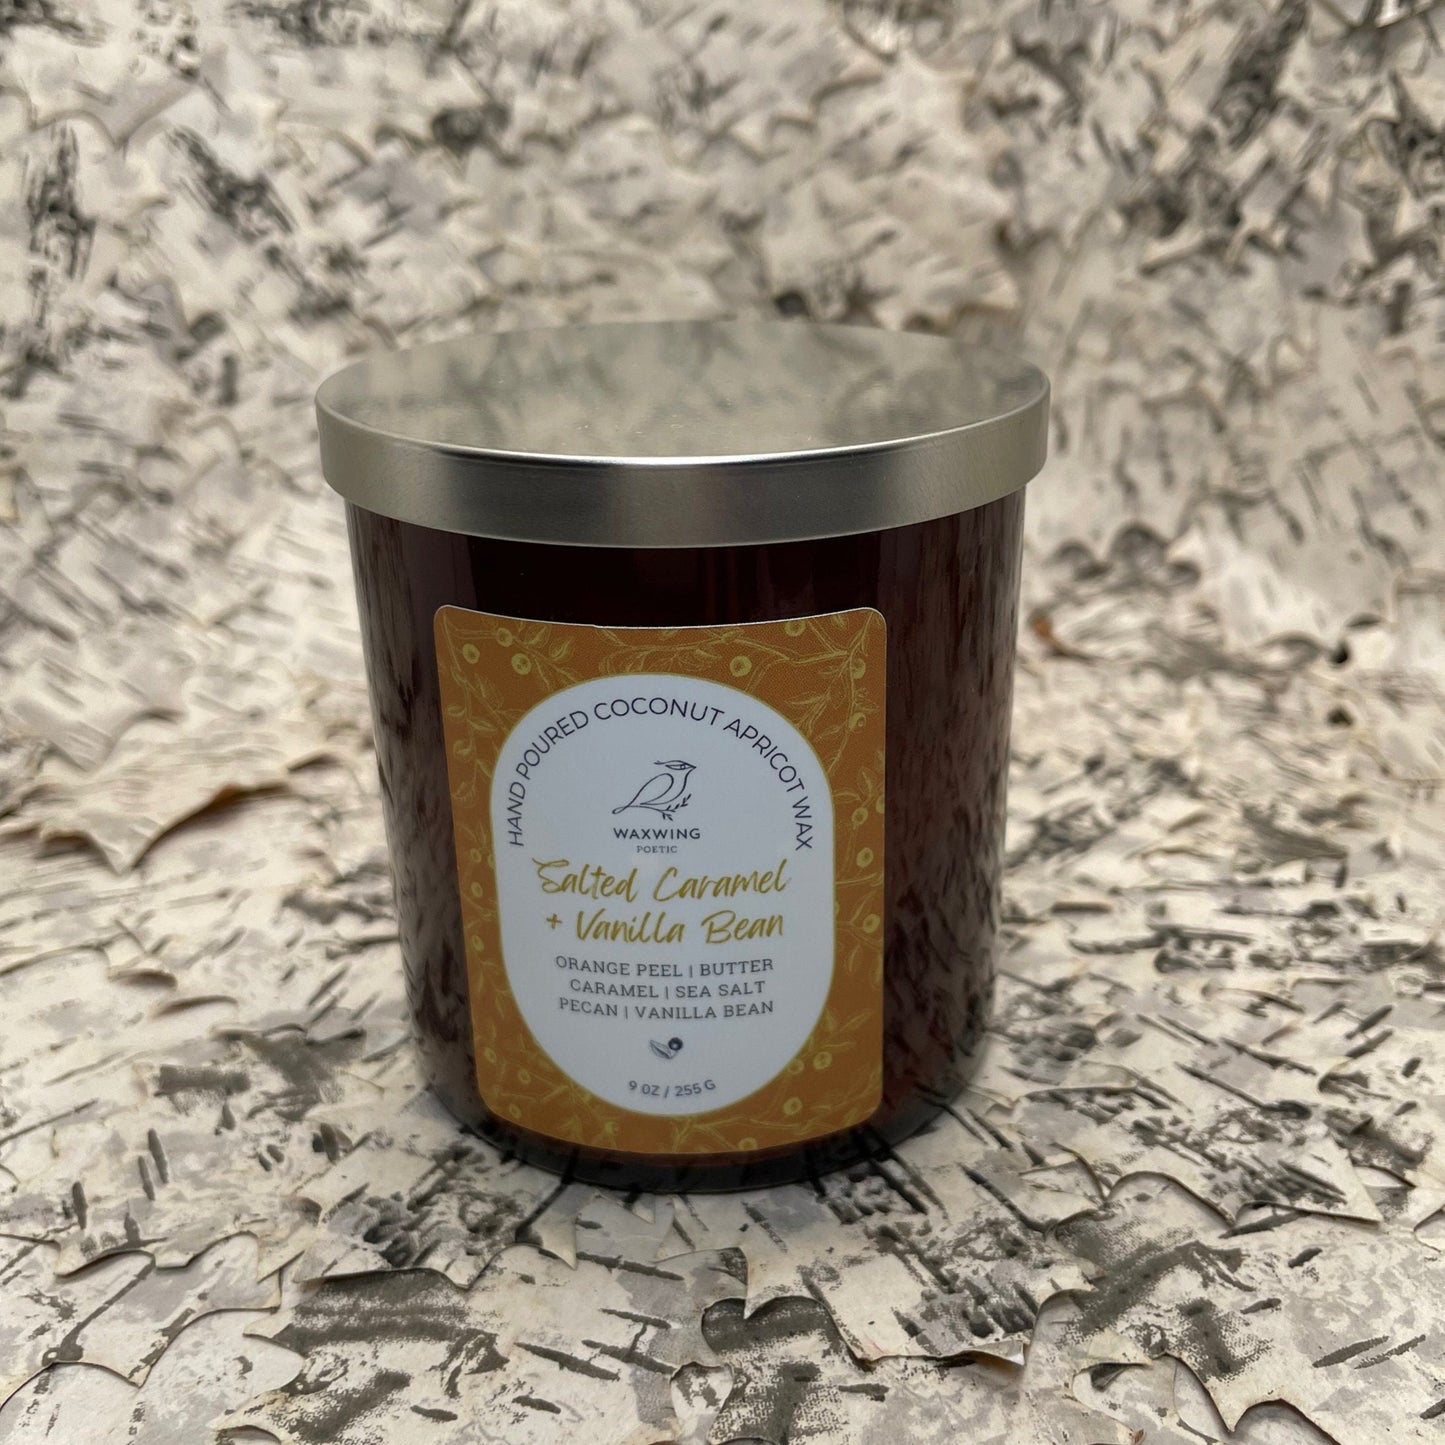 Salted Caramel + Vanilla Bean | Coconut Apricot Wax Candle